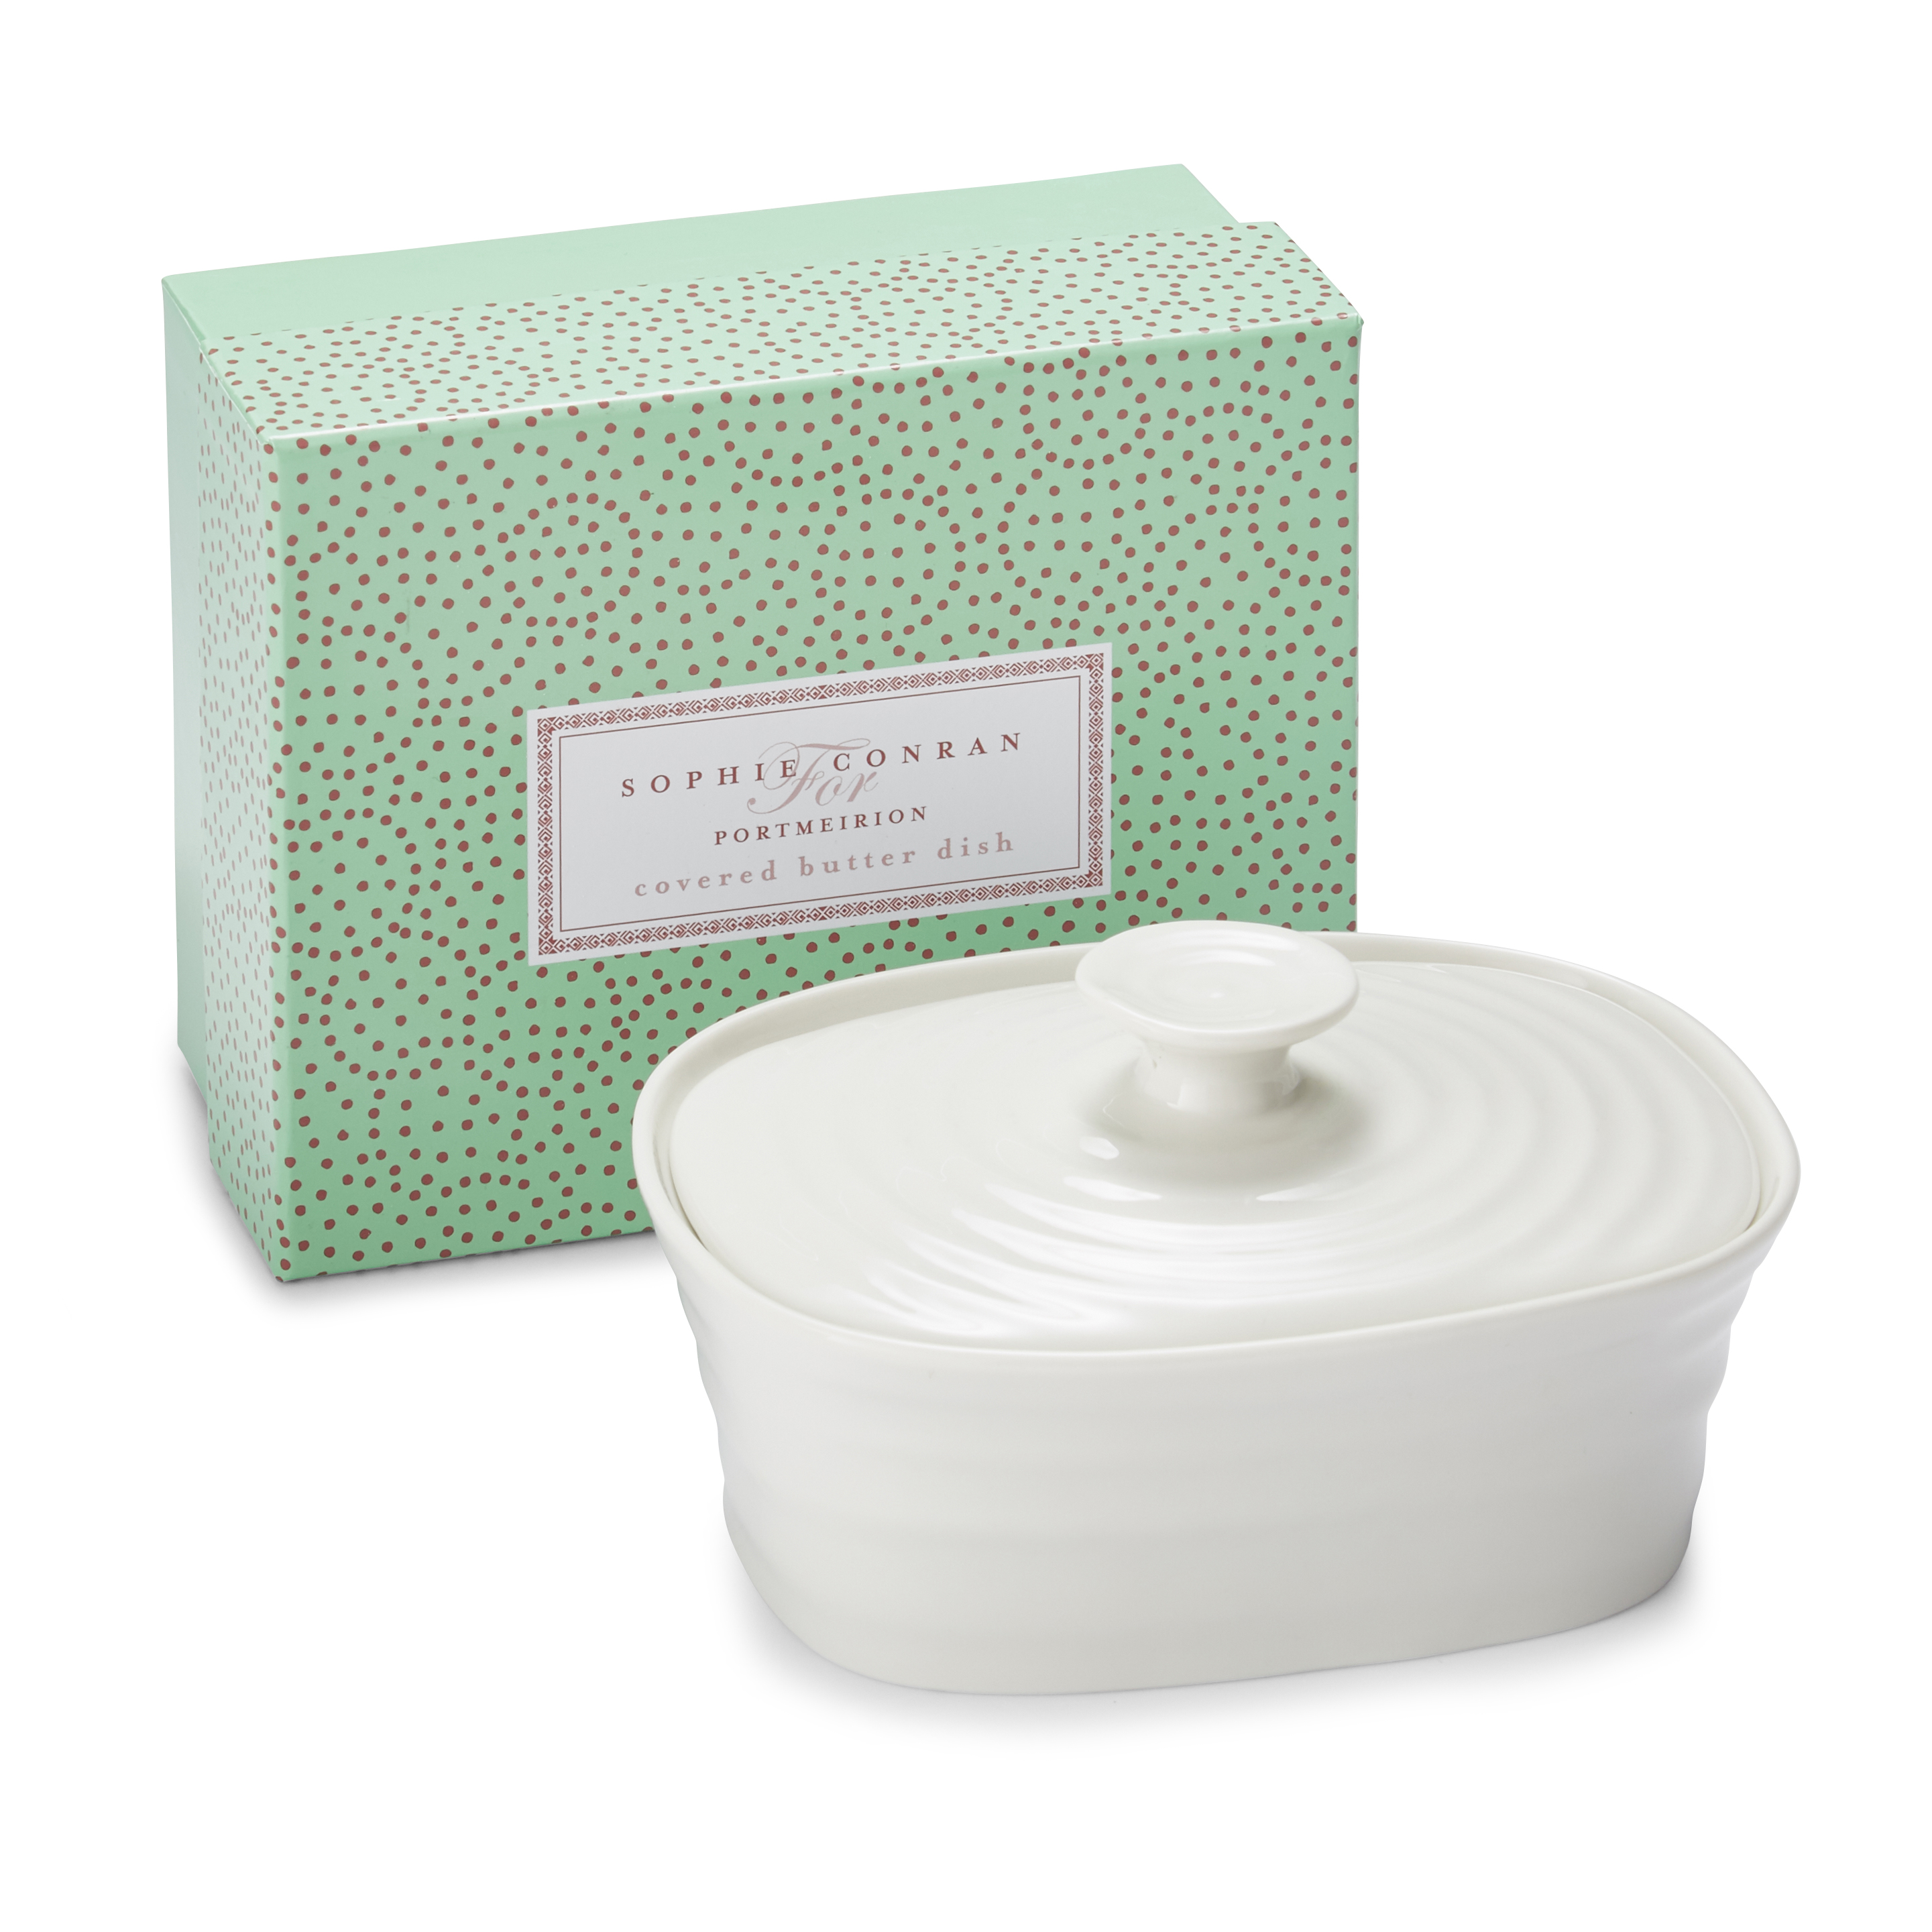 Portmeirion Sophie Conran White Covered Butter image number null